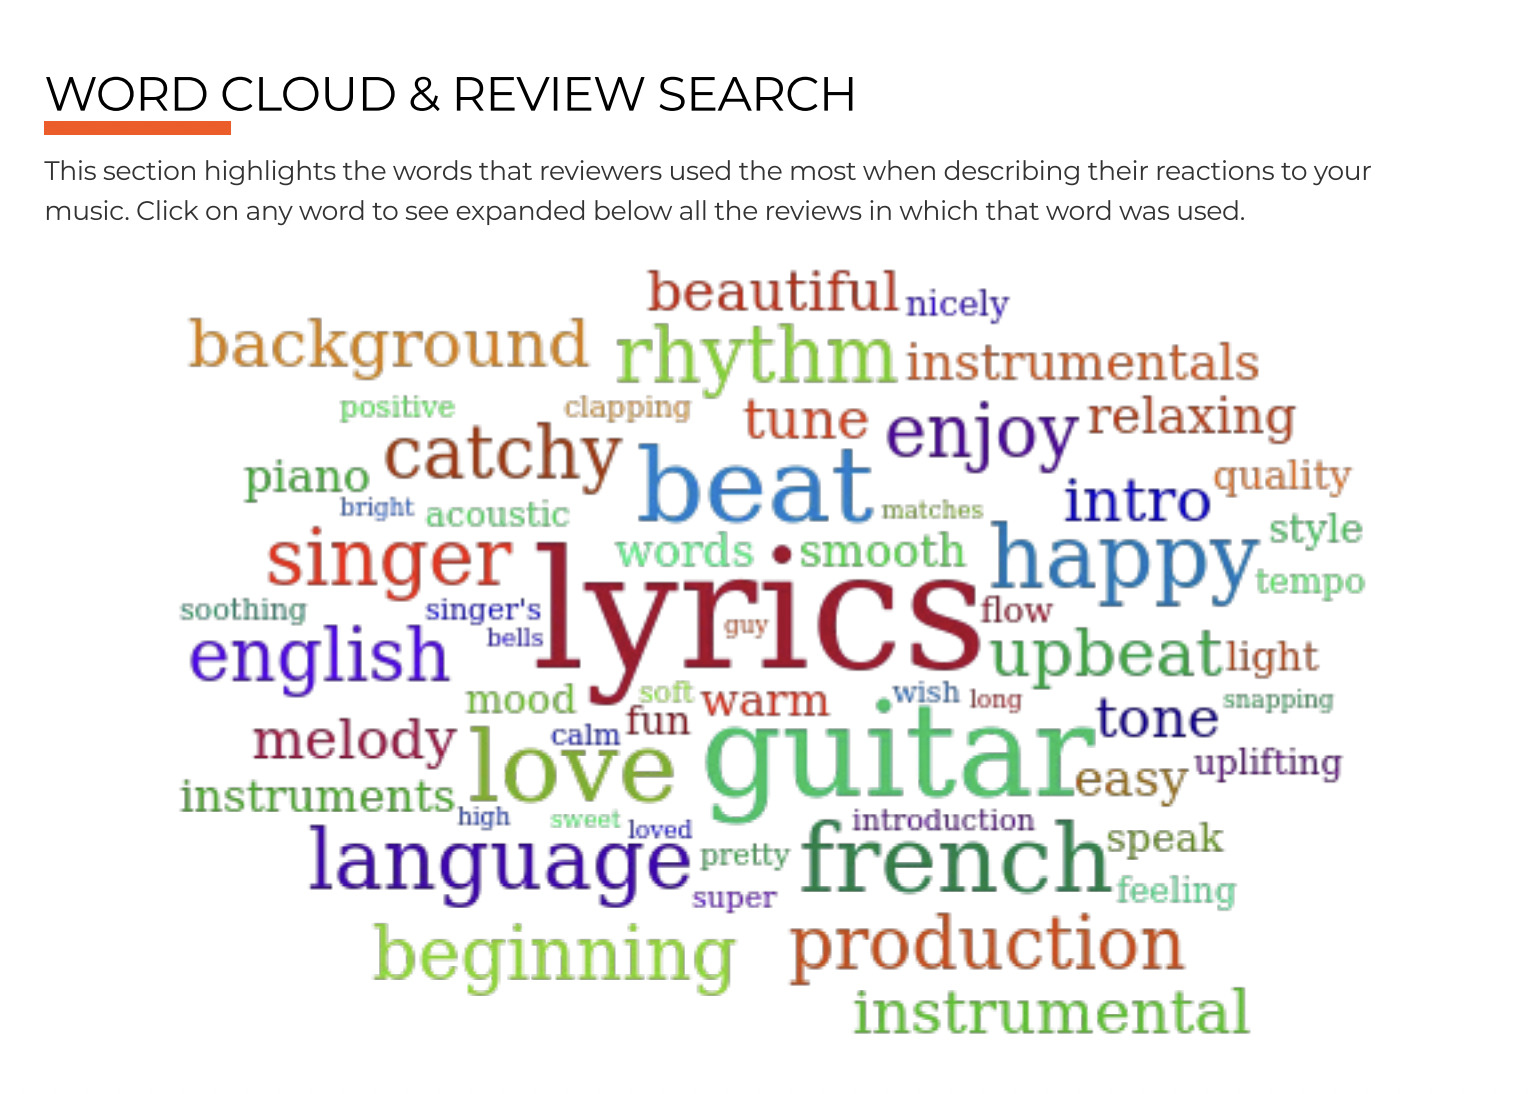 word cloud and review search - ari's take tunecore review 2022